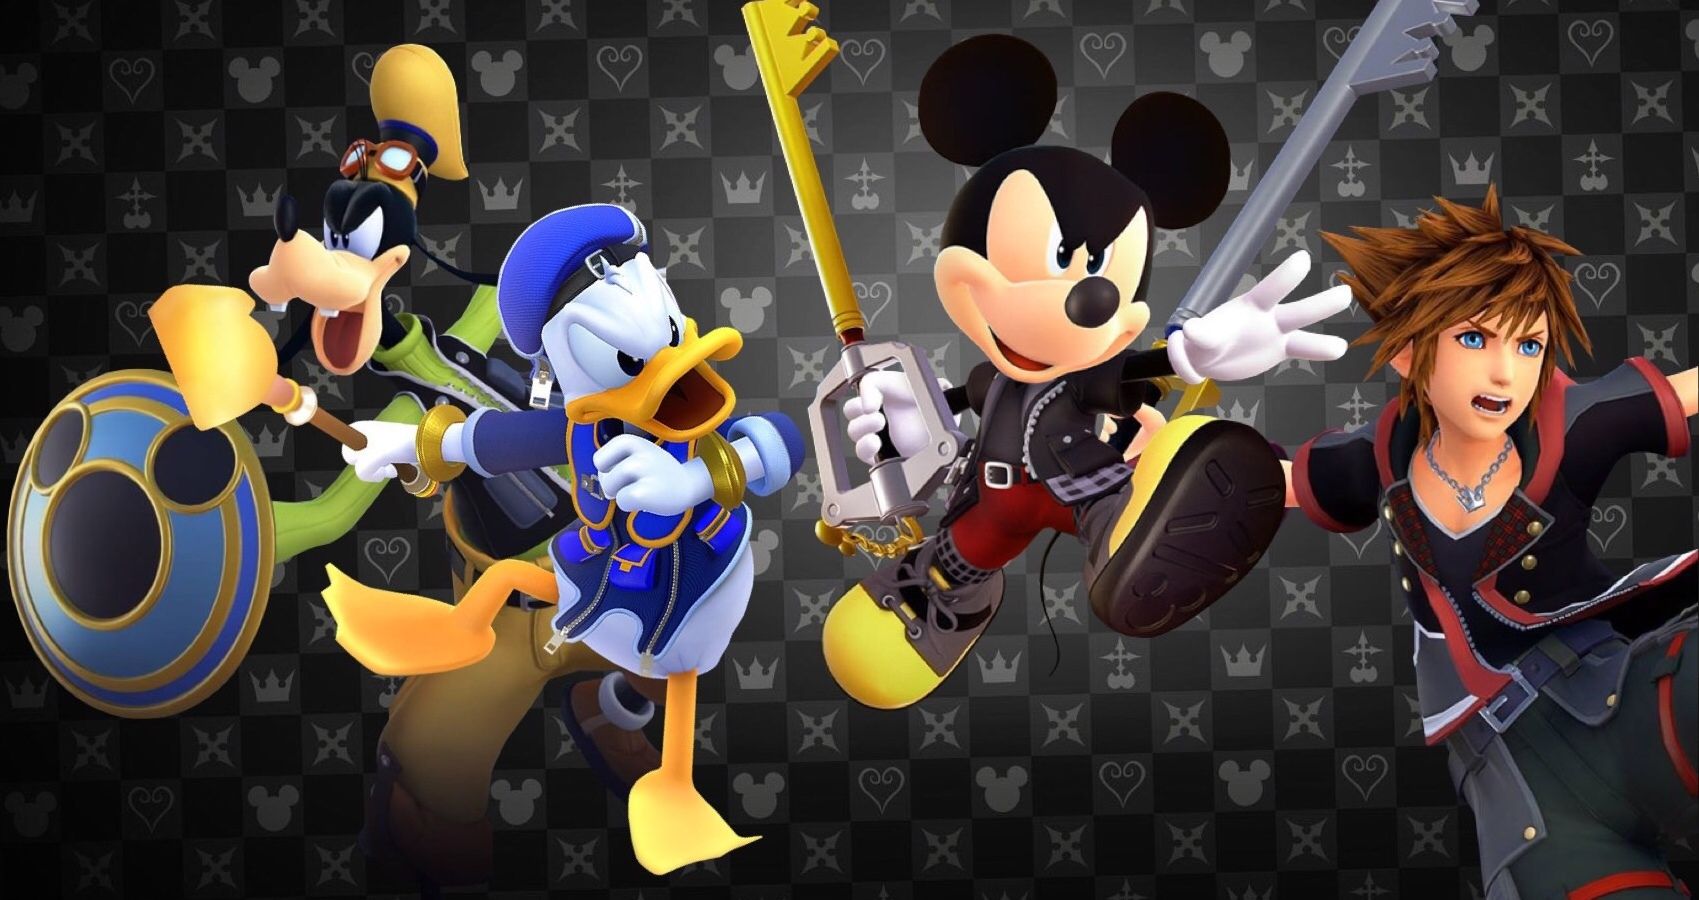 Ranking Every Kingdom Hearts Game Ever Made From Worst To Best